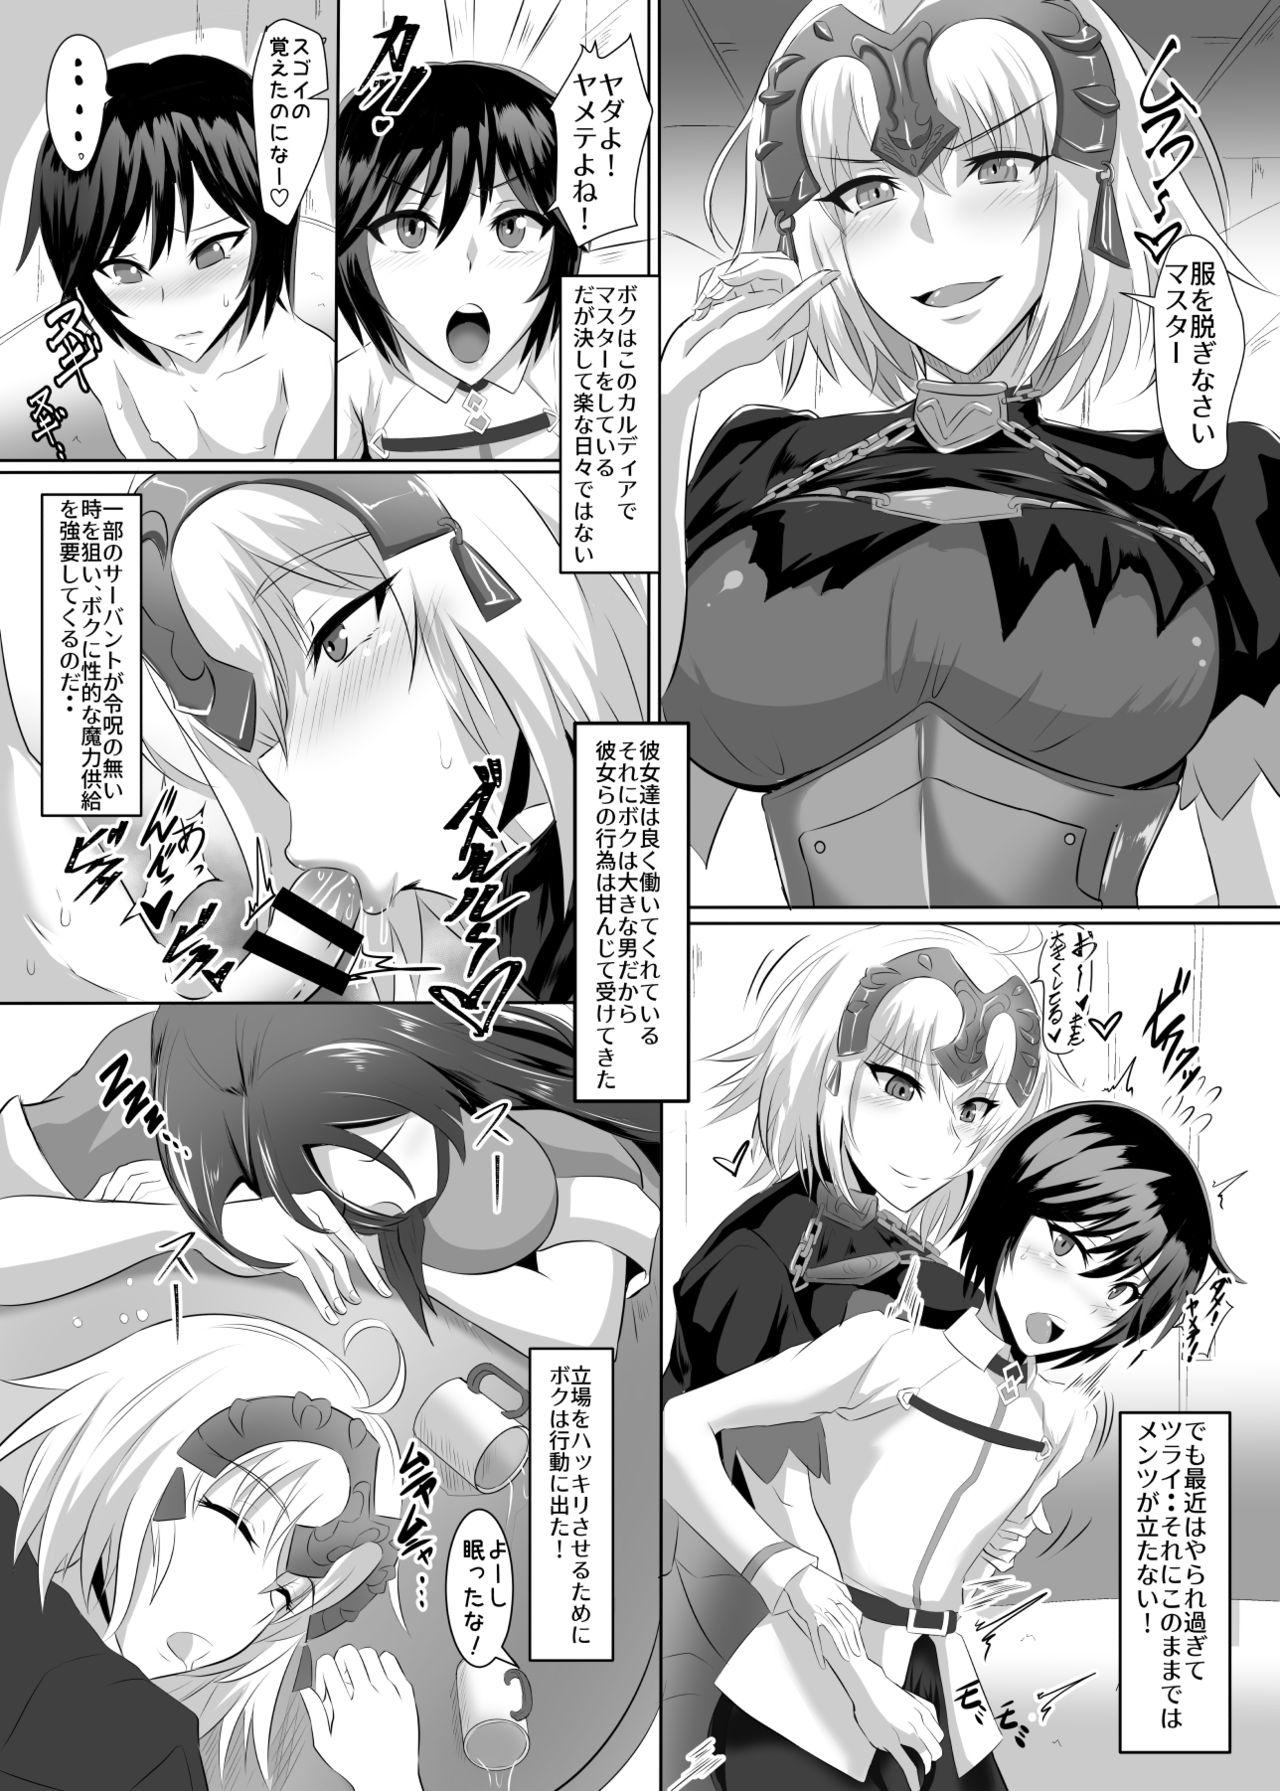 Pussy Fingering Gehenna 7 - Fate grand order Women - Page 4